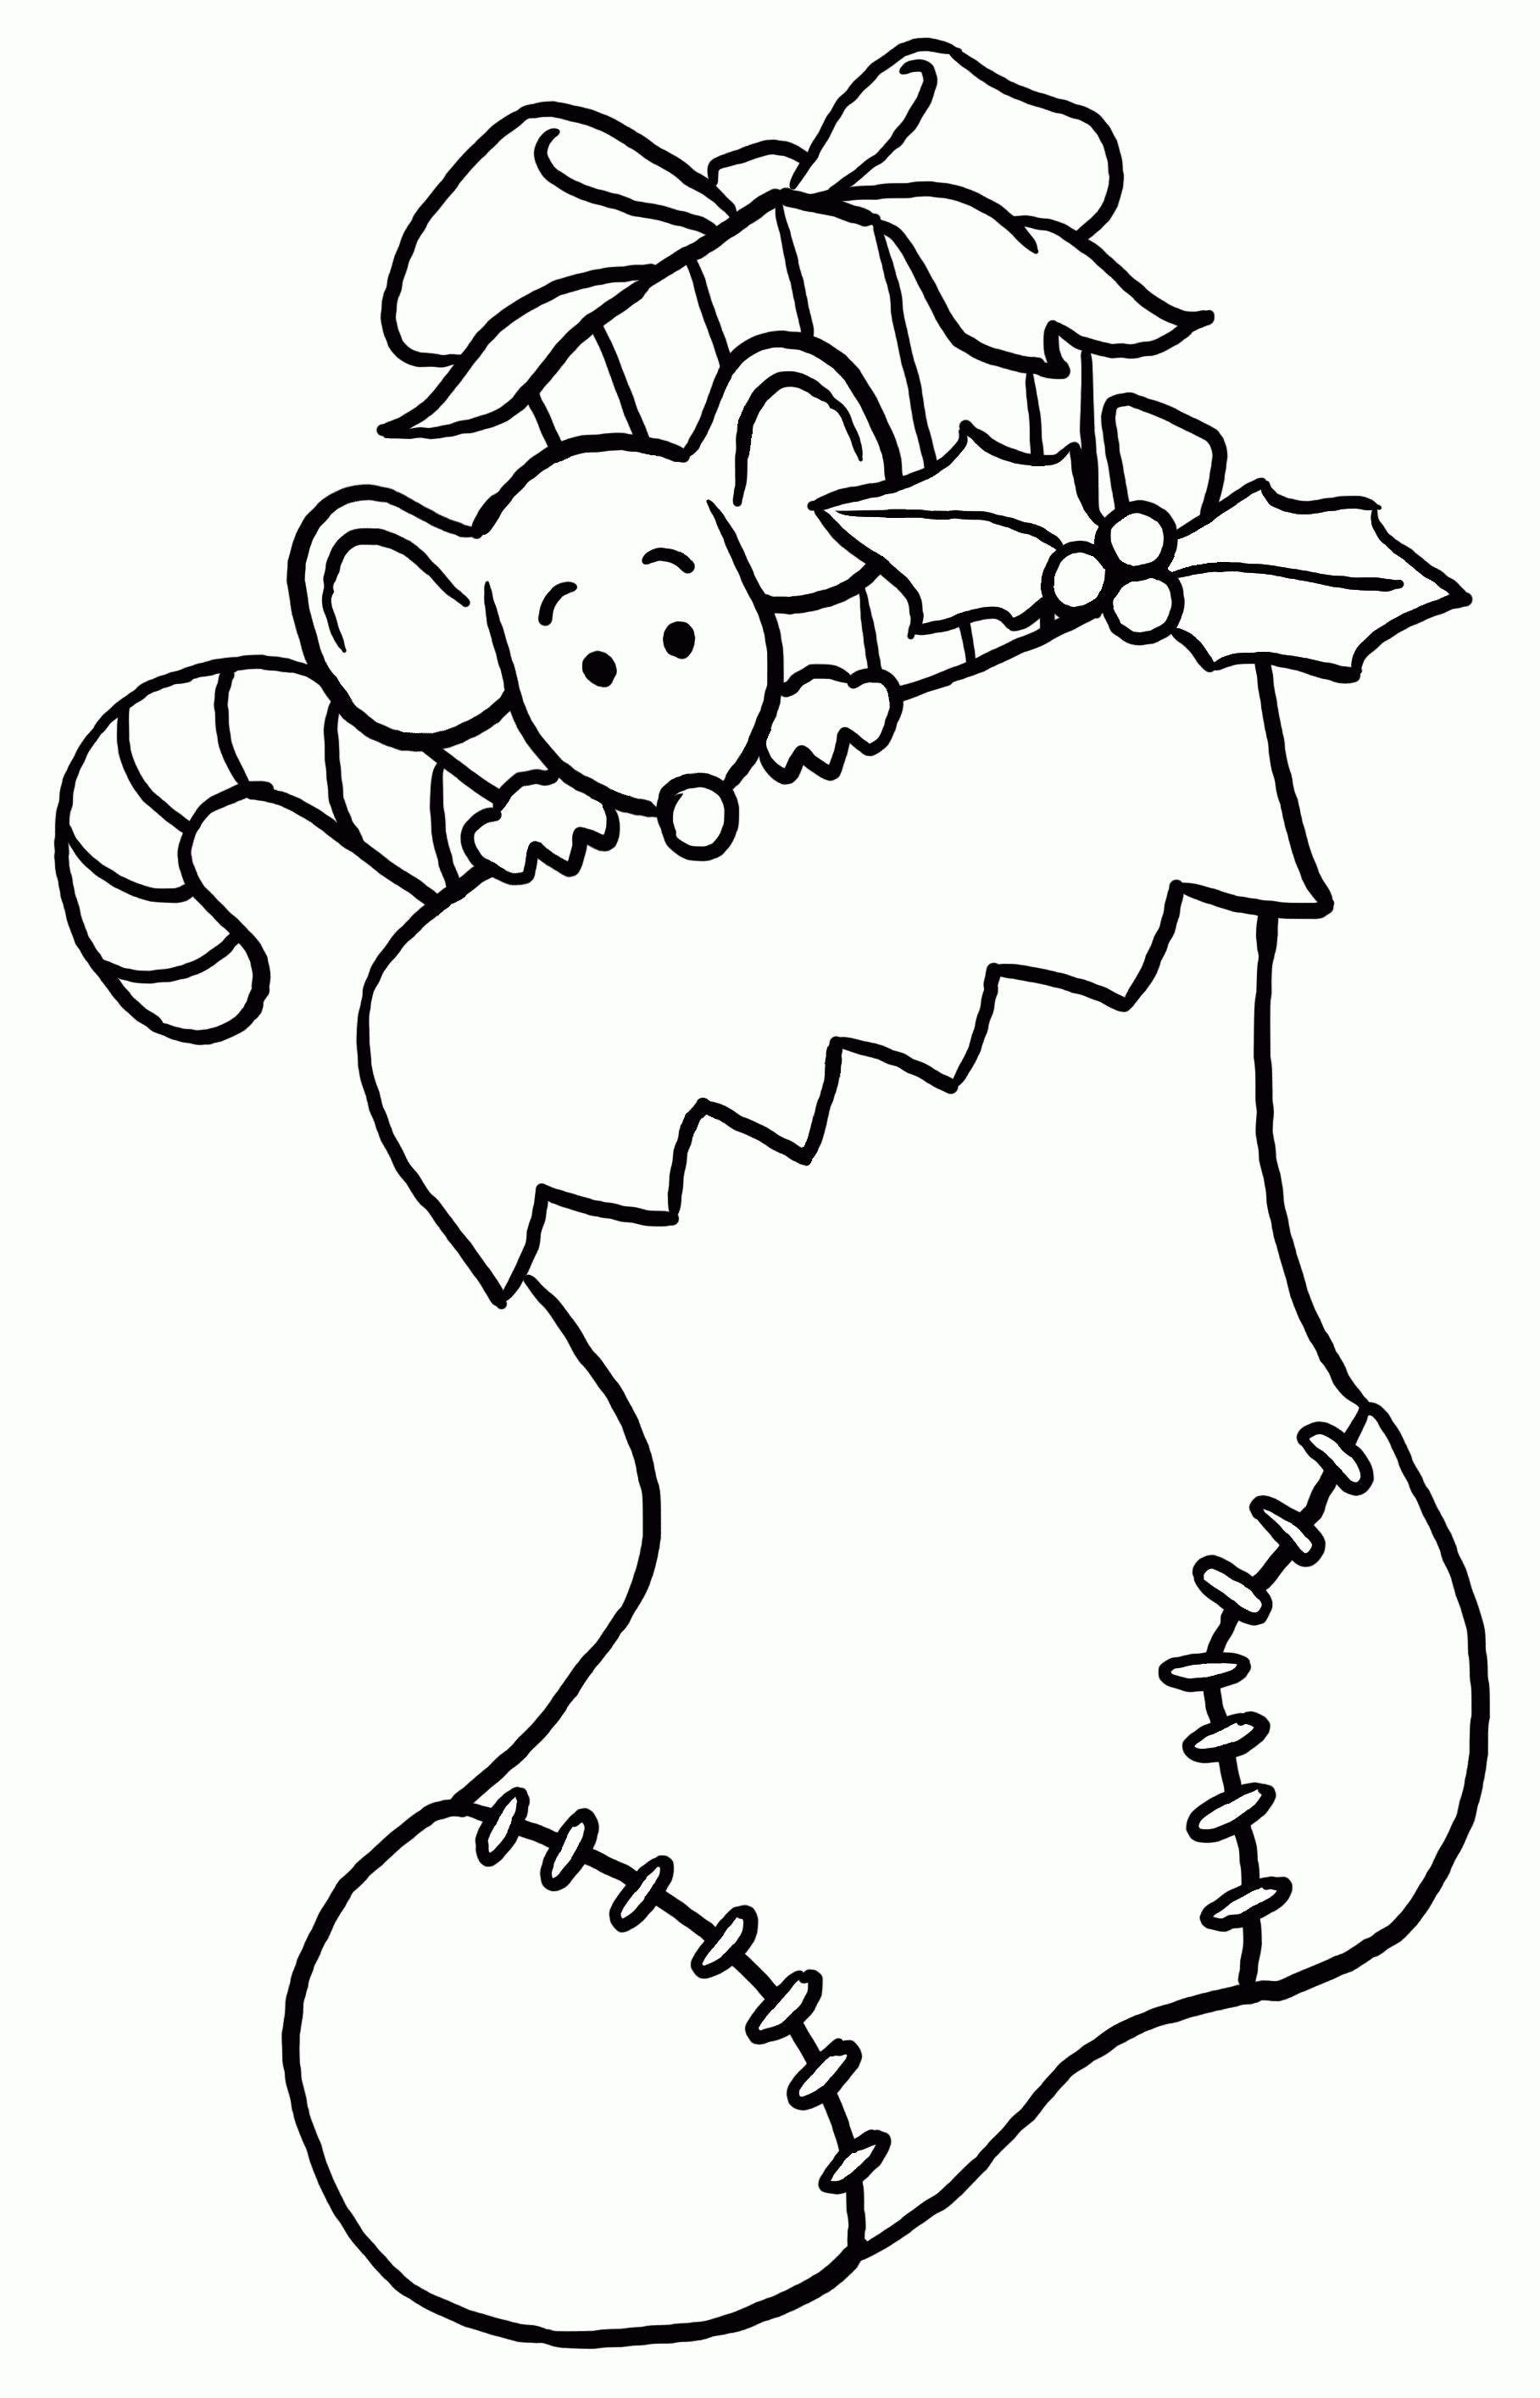 Printable Free Christmas Colouring Pages - High Quality Coloring Pages